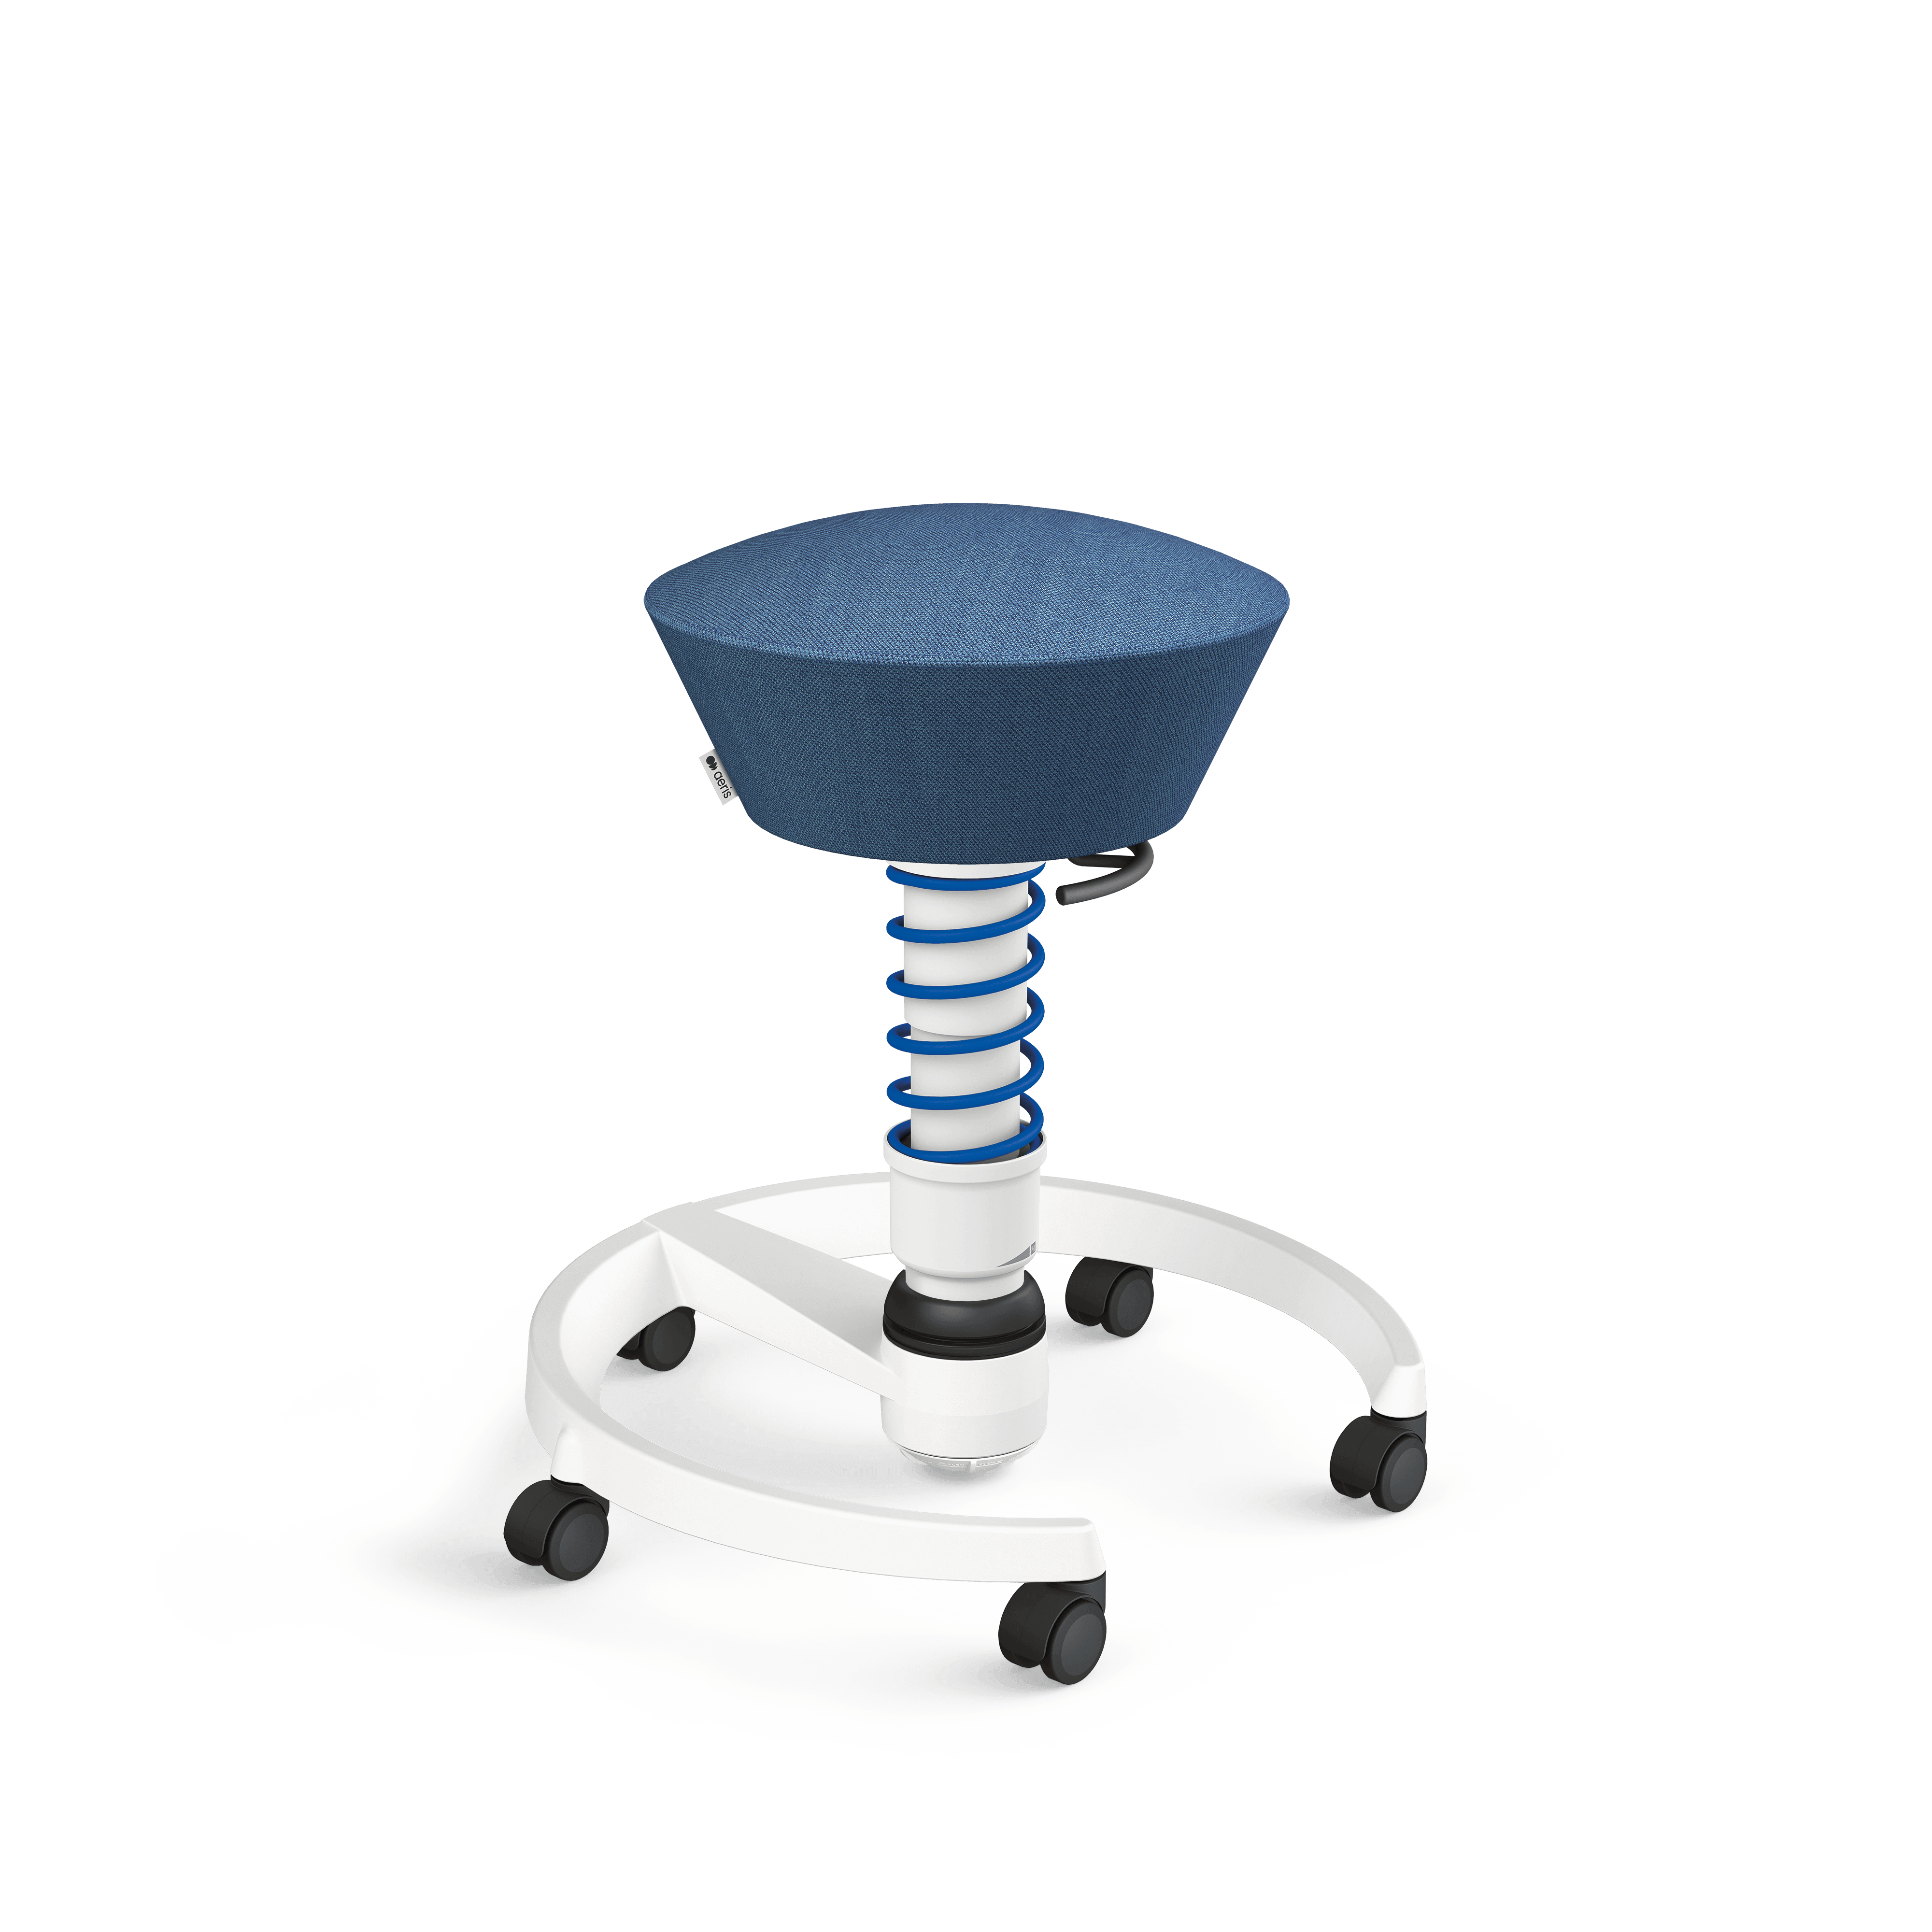 Aeris Swopper office stool with blue seat and matching spring, white frame and castors.